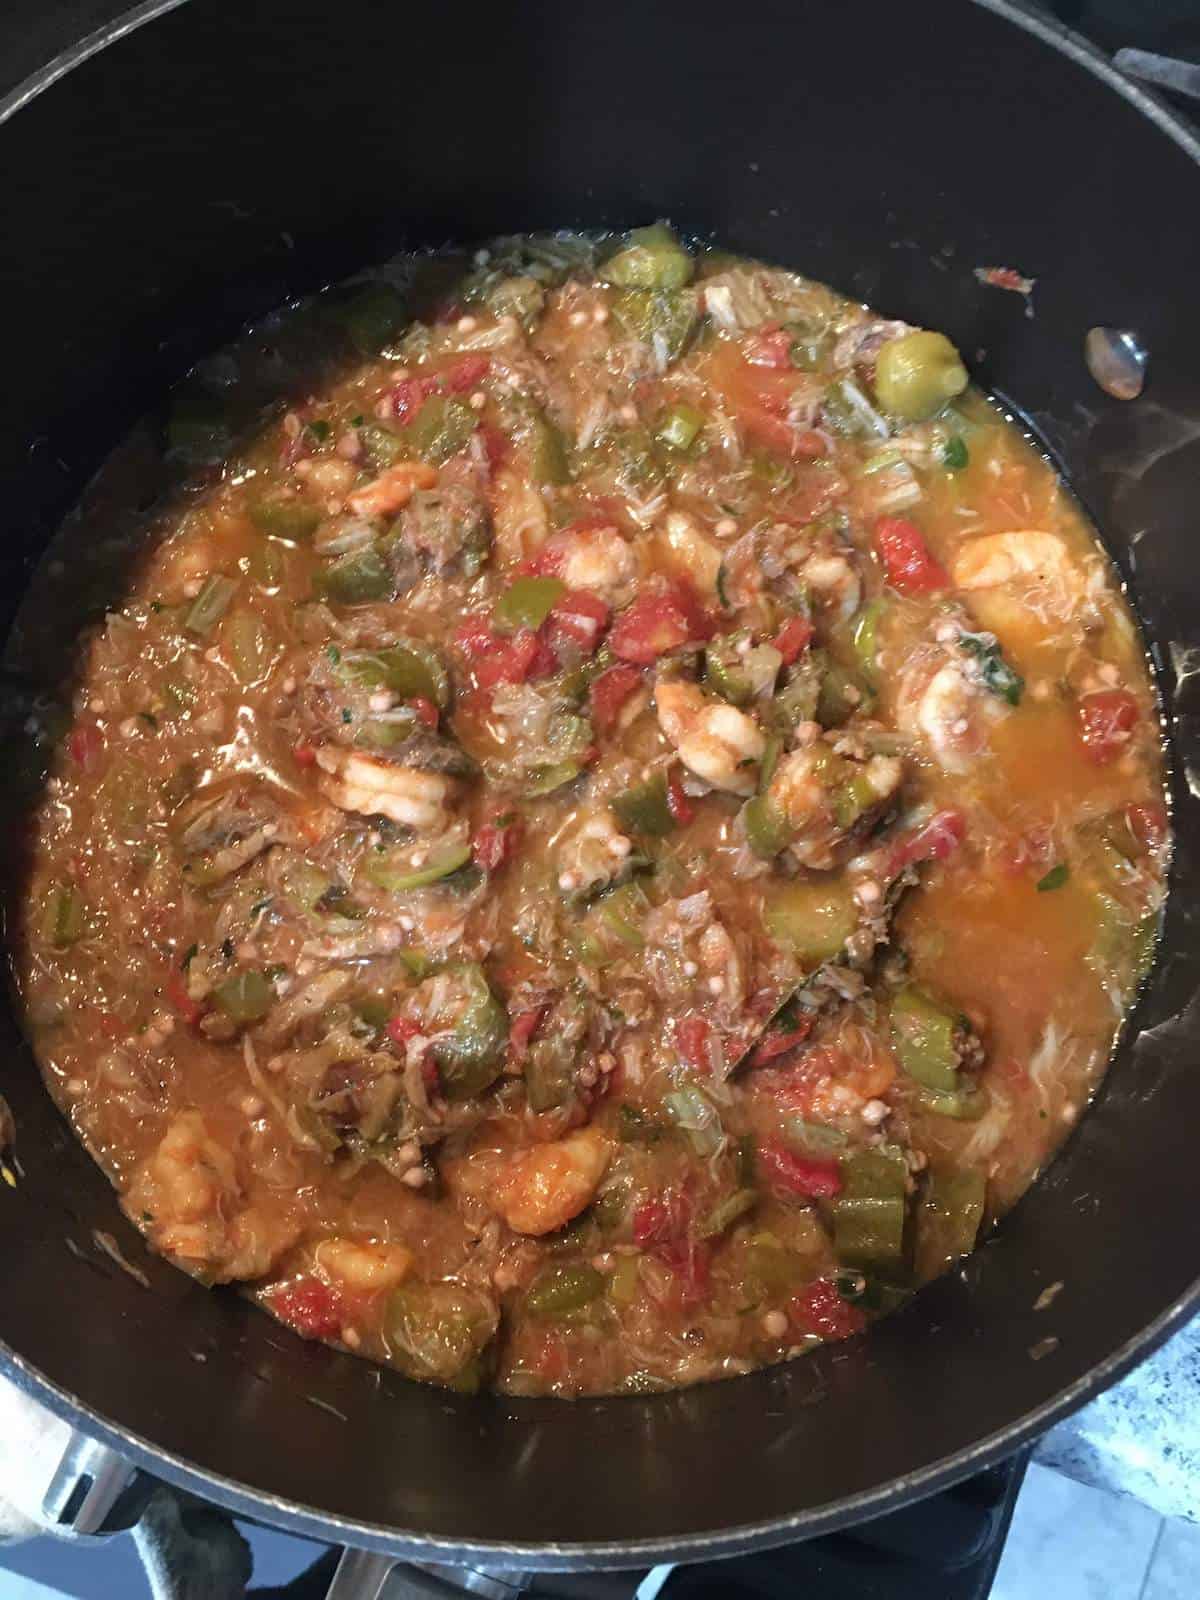 Seafood gumbo simmering in a black pot.